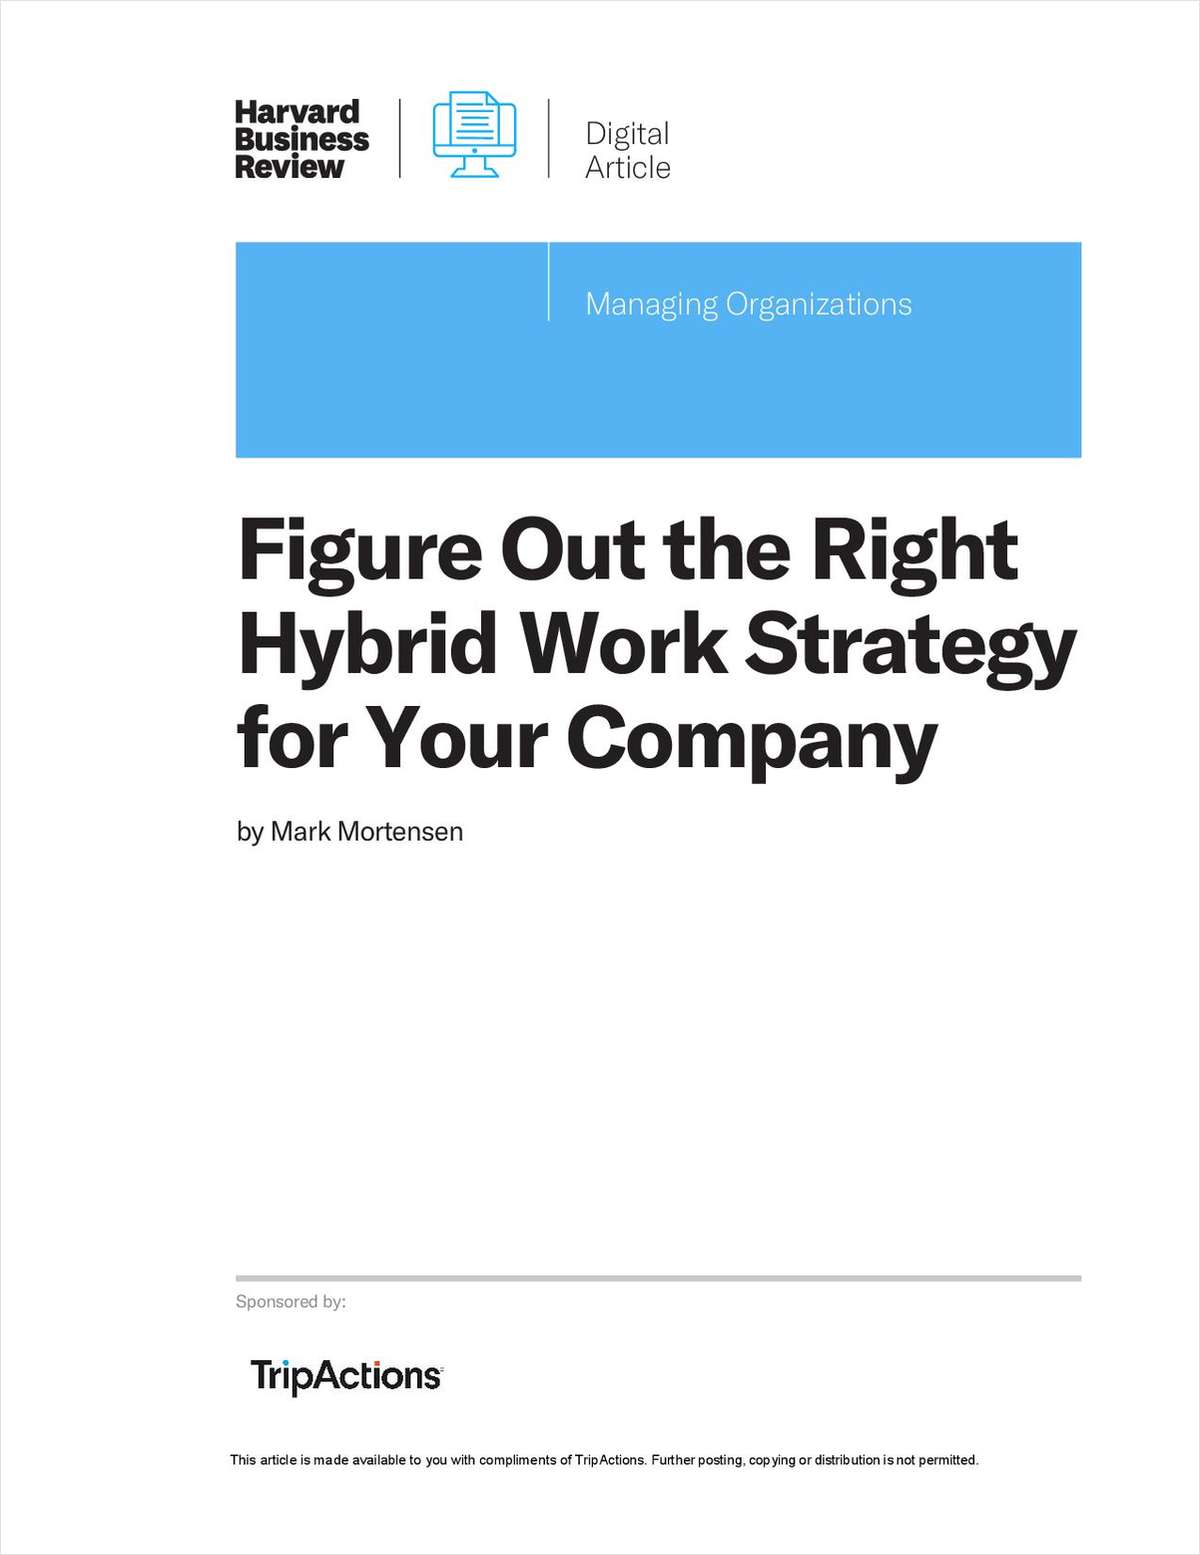 Figure Out the Right Hybrid Work Strategy for Your Company